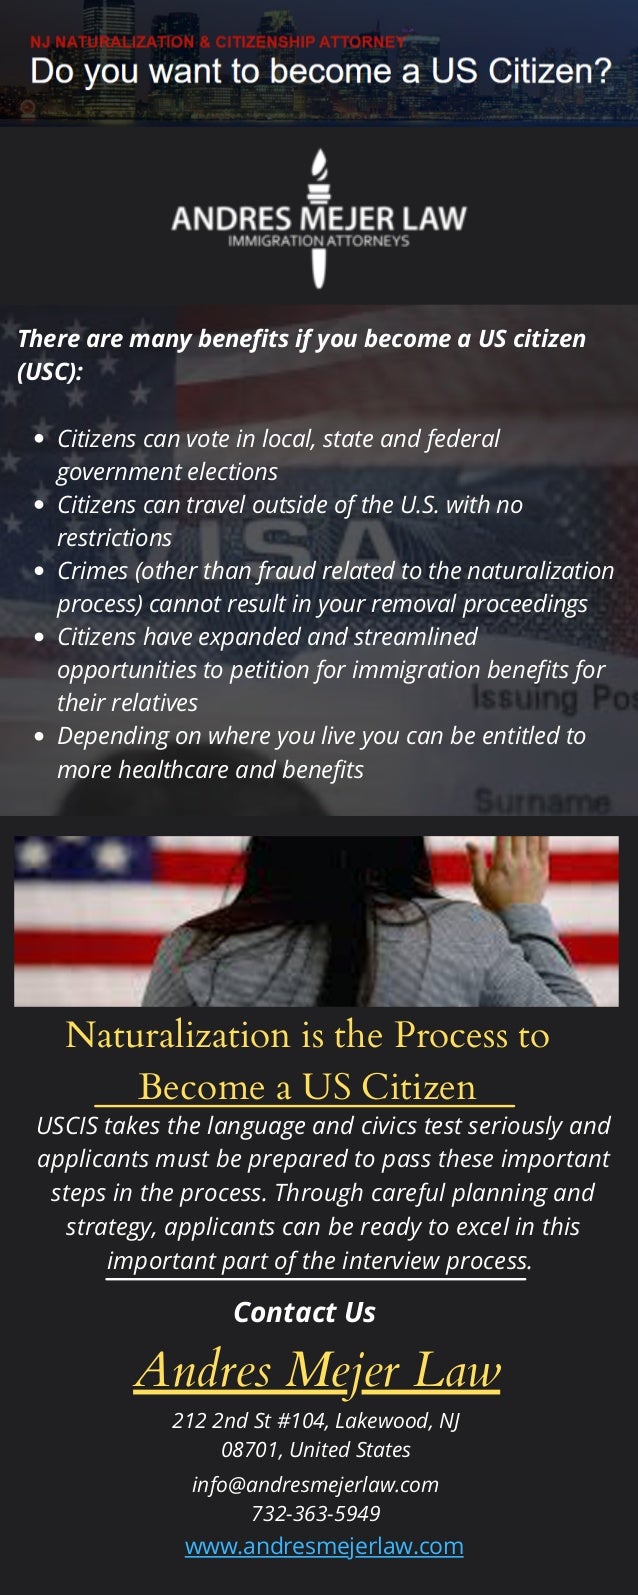 Naturalization is the Process to
Become a US Citizen
Citizens can vote in local, state and federal
government elections
Citizens can travel outside of the U.S. with no
restrictions
Crimes (other than fraud related to the naturalization
process) cannot result in your removal proceedings
Citizens have expanded and streamlined
opportunities to petition for immigration benefits for
their relatives
Depending on where you live you can be entitled to
more healthcare and benefits
There are many benefits if you become a US citizen
(USC):
USCIS takes the language and civics test seriously and
applicants must be prepared to pass these important
steps in the process. Through careful planning and
strategy, applicants can be ready to excel in this
important part of the interview process.
Contact Us
Andres Mejer Law
212 2nd St #104, Lakewood, NJ
08701, United States
info@andresmejerlaw.com
732-363-5949
www.andresmejerlaw.com
 